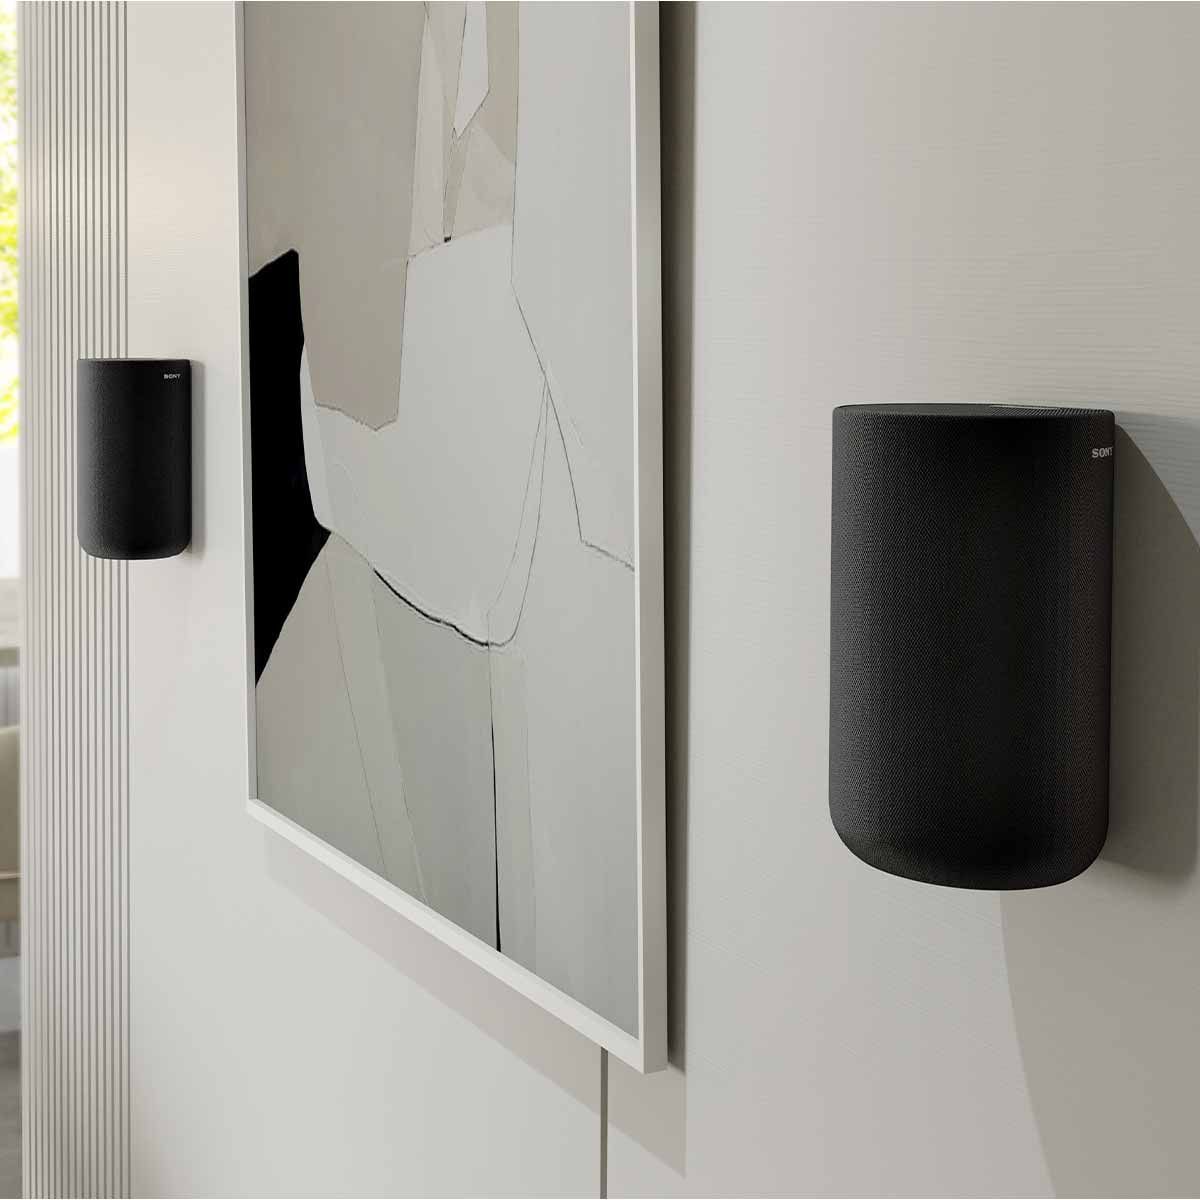 Sony SARS5 Wireless rear speakers with built-in battery for HT-A7000/HT-A5000 - mounted on wall